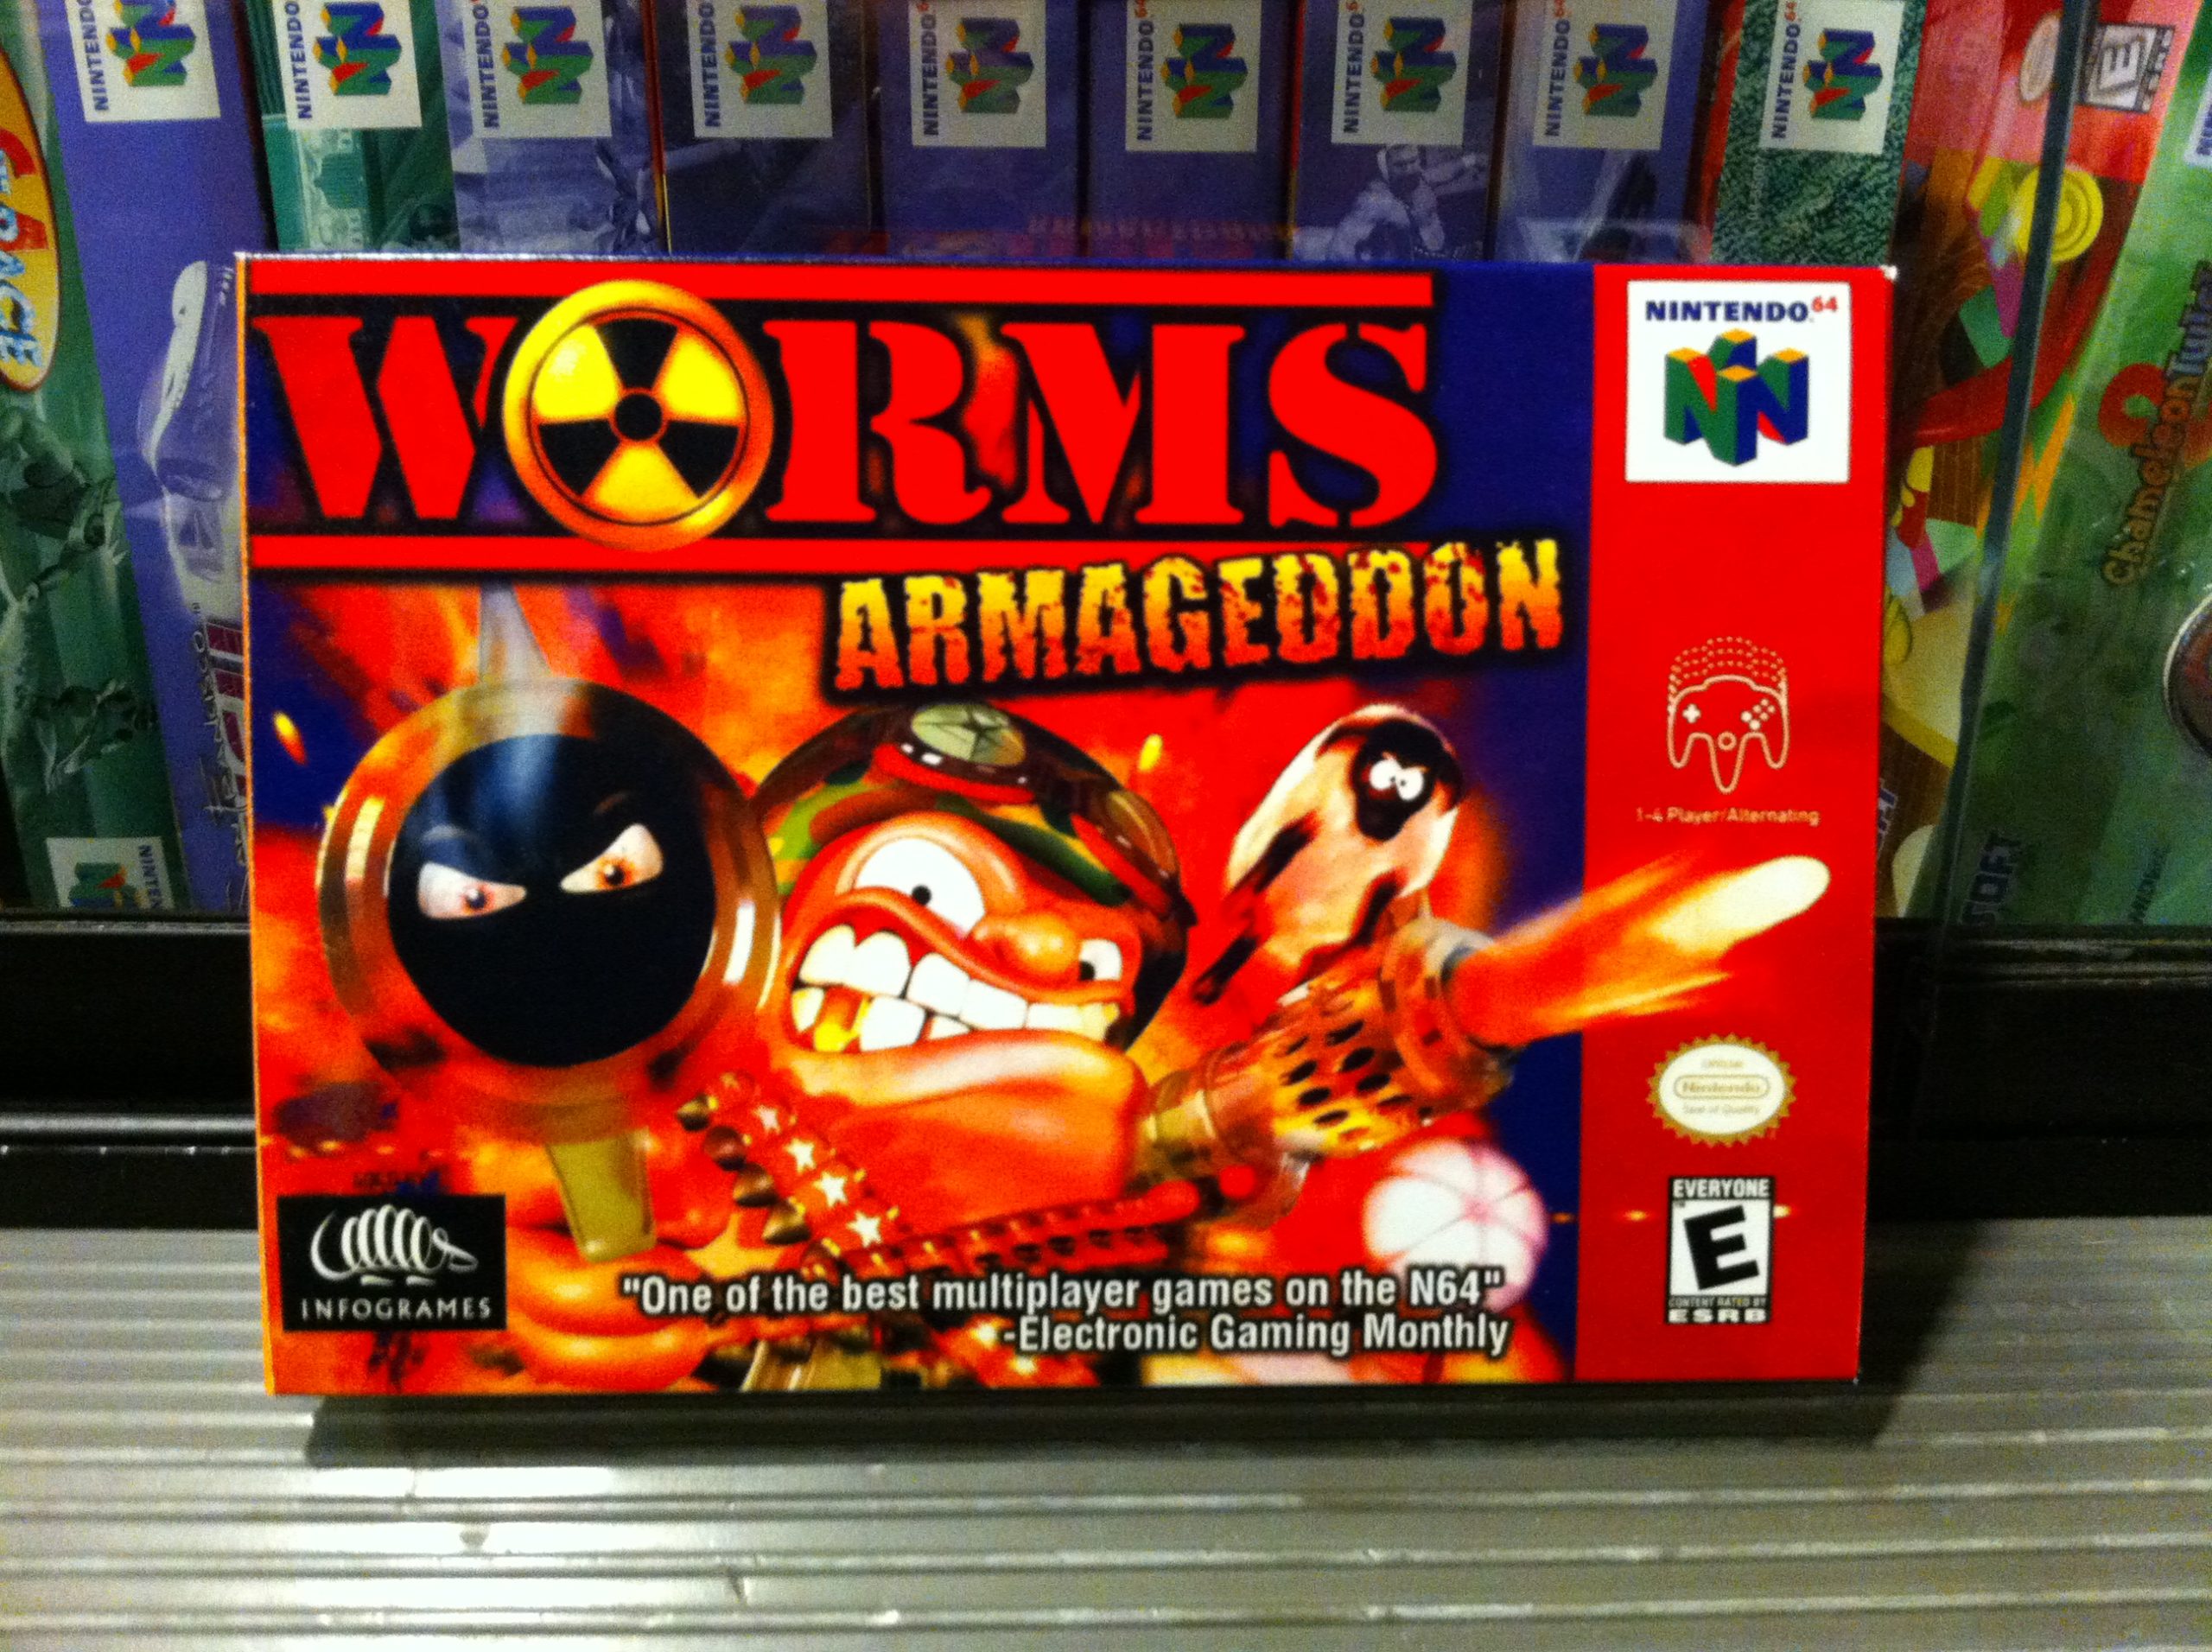 games-puzzles-video-games-worms-armageddon-n64-etna-pe